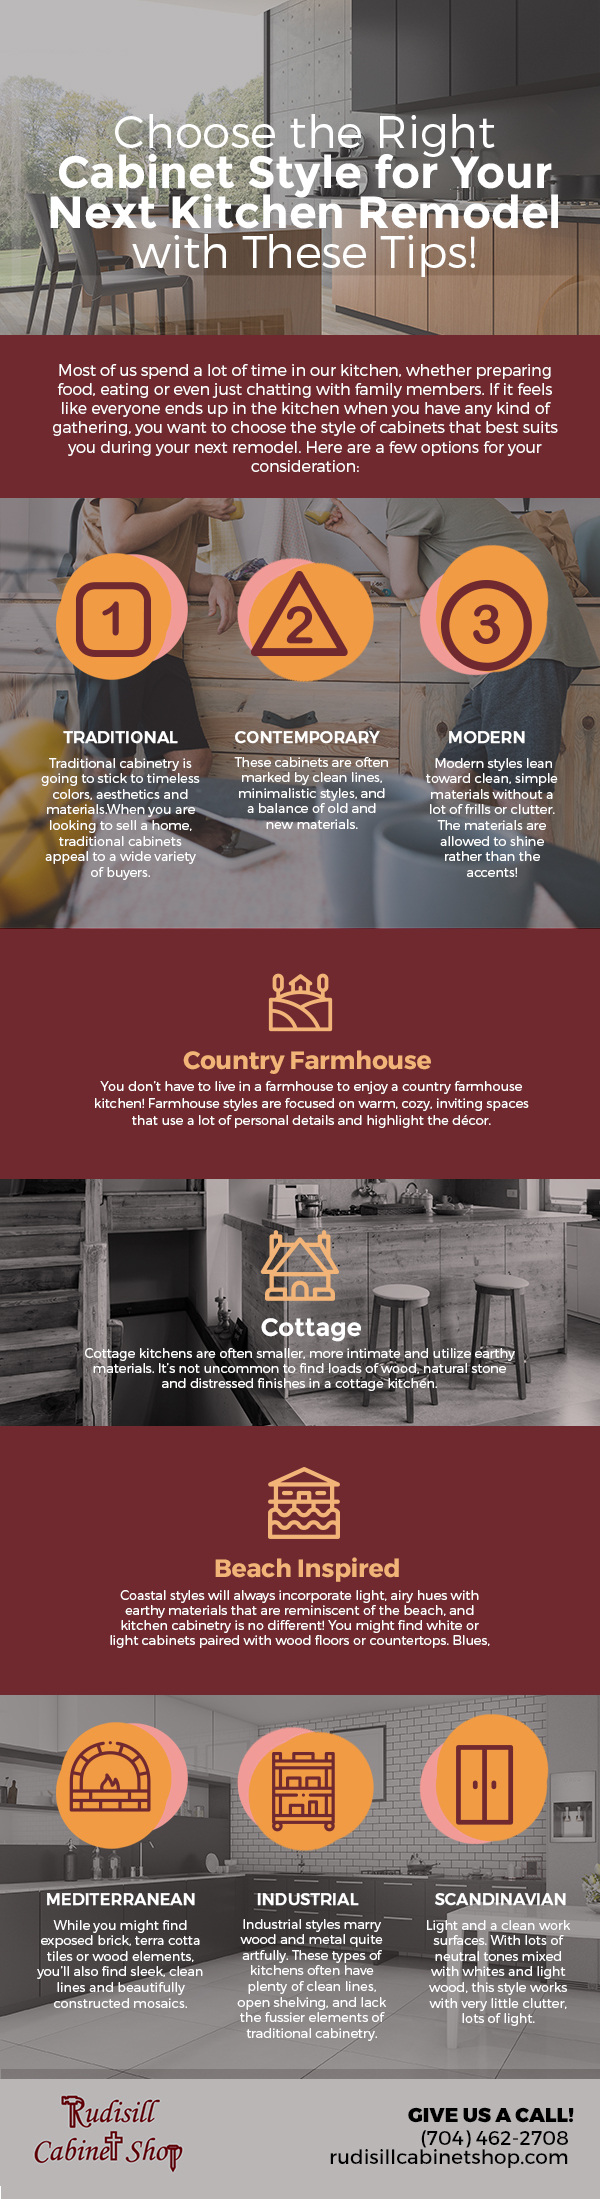 Choose the Right Cabinet Style for Your Next Kitchen Remodel with These Tips! [infographic]